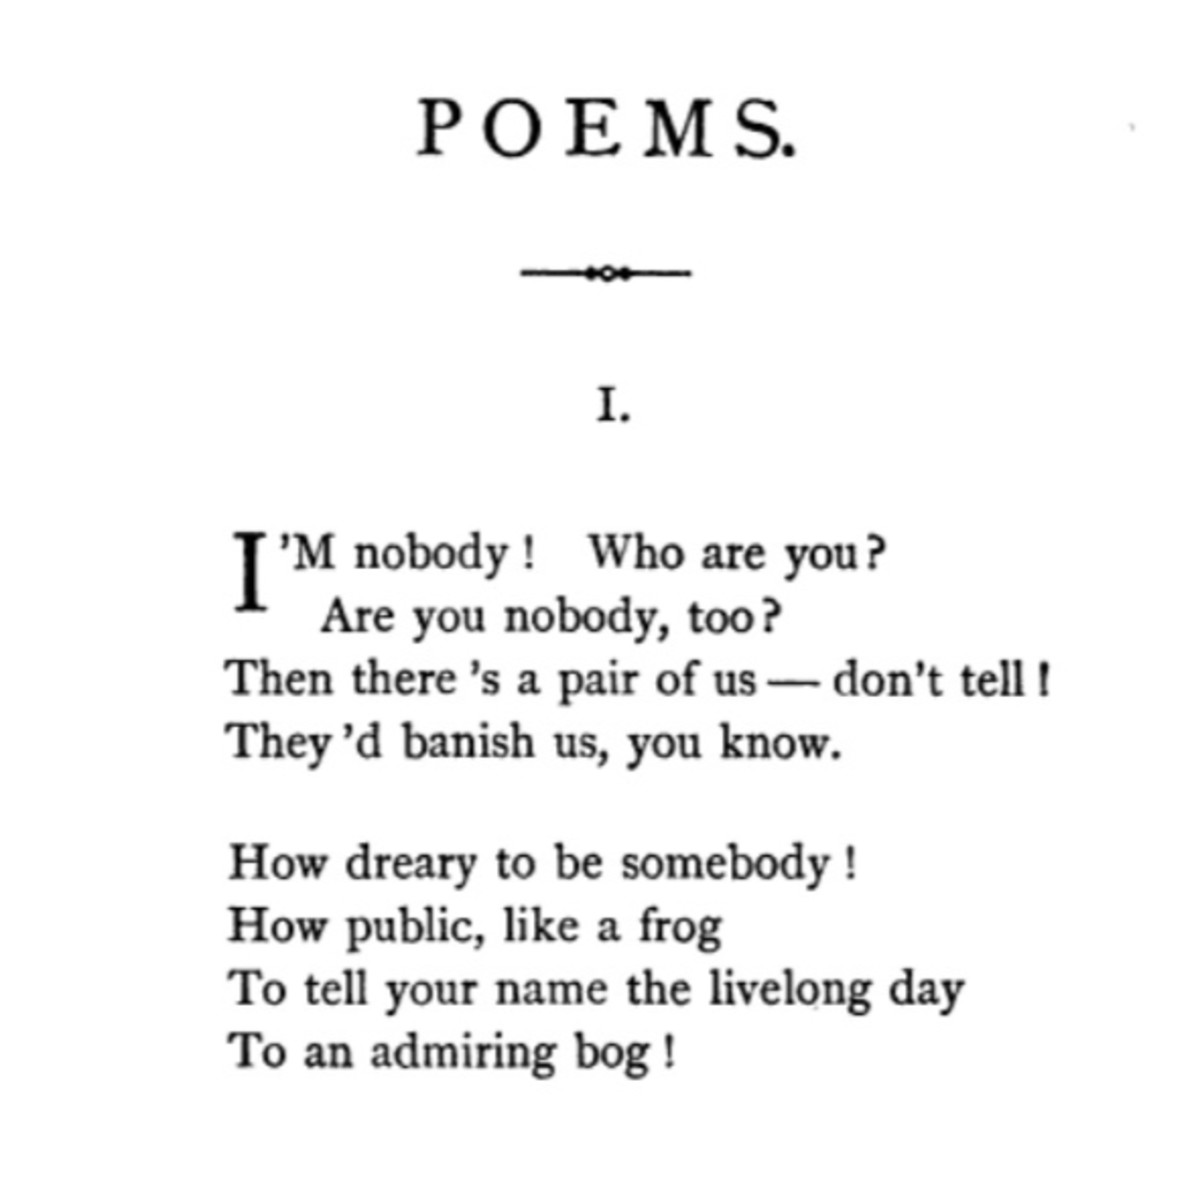 First posthumous publication of the poem "I'm Nobody! Who are you?"